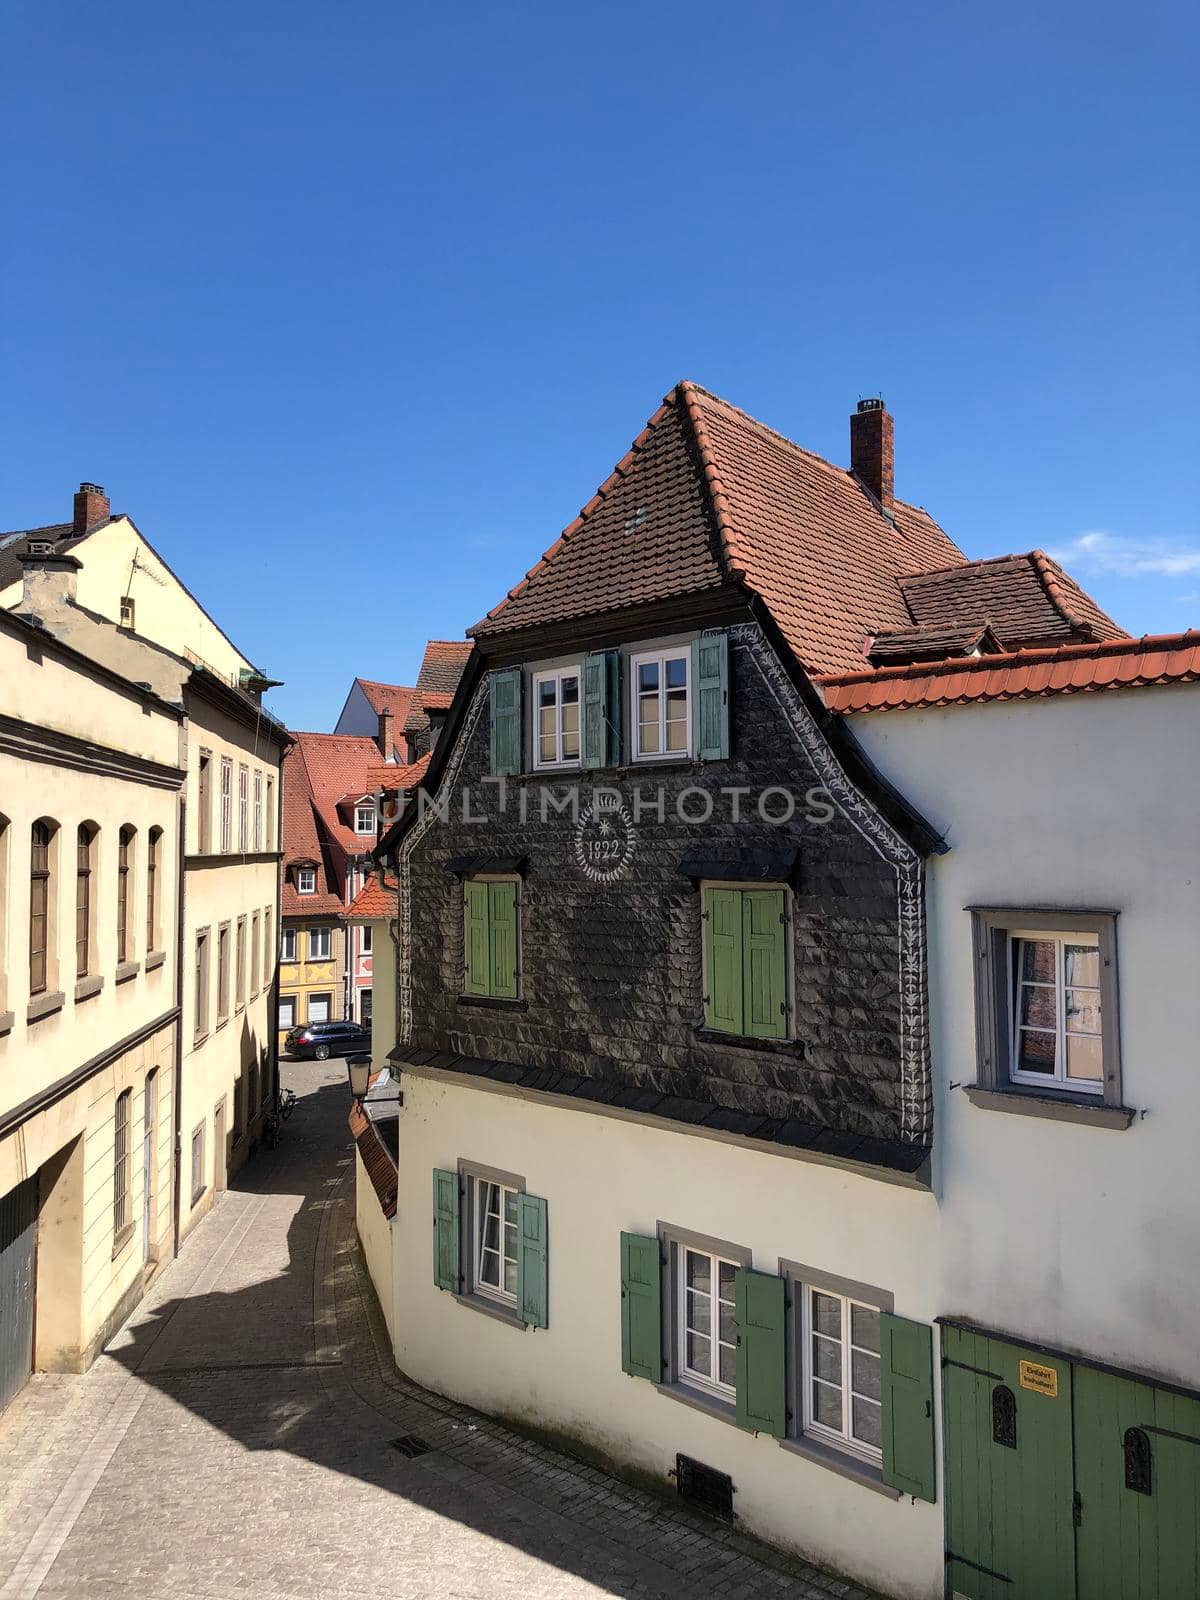 Street in the old town of Bamberg Germany